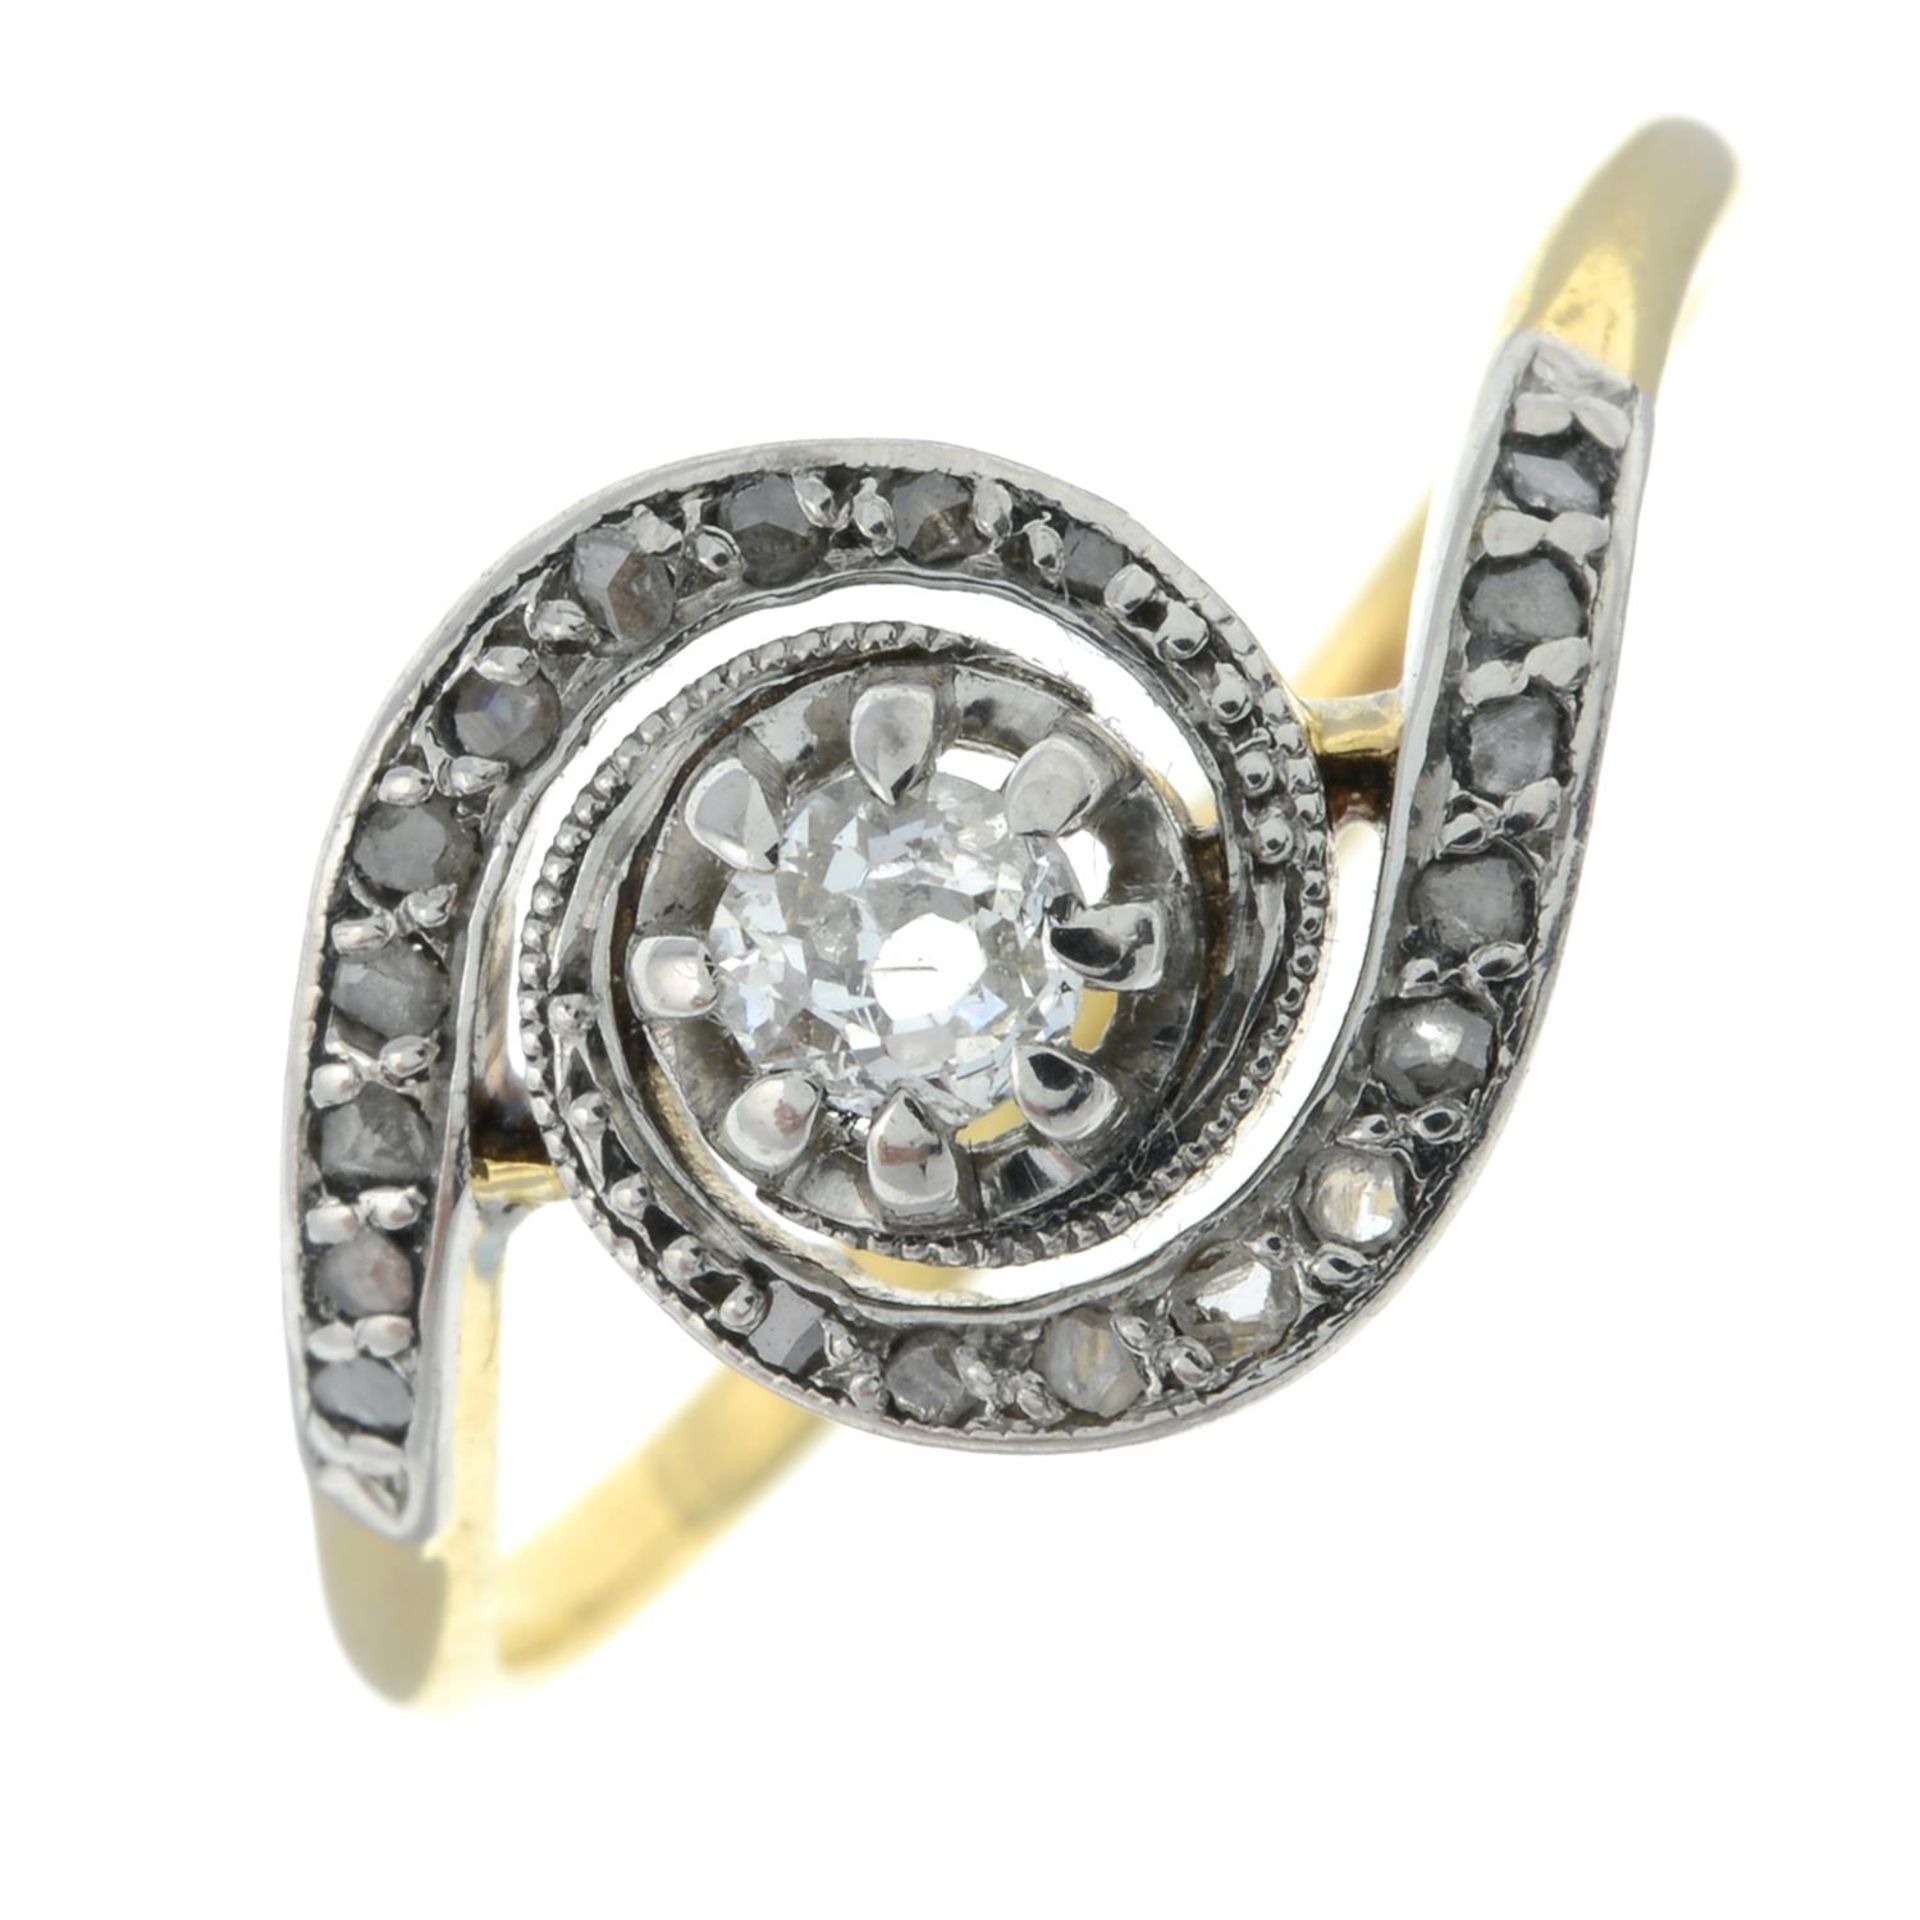 An old-cut and rose-cut diamond ring.